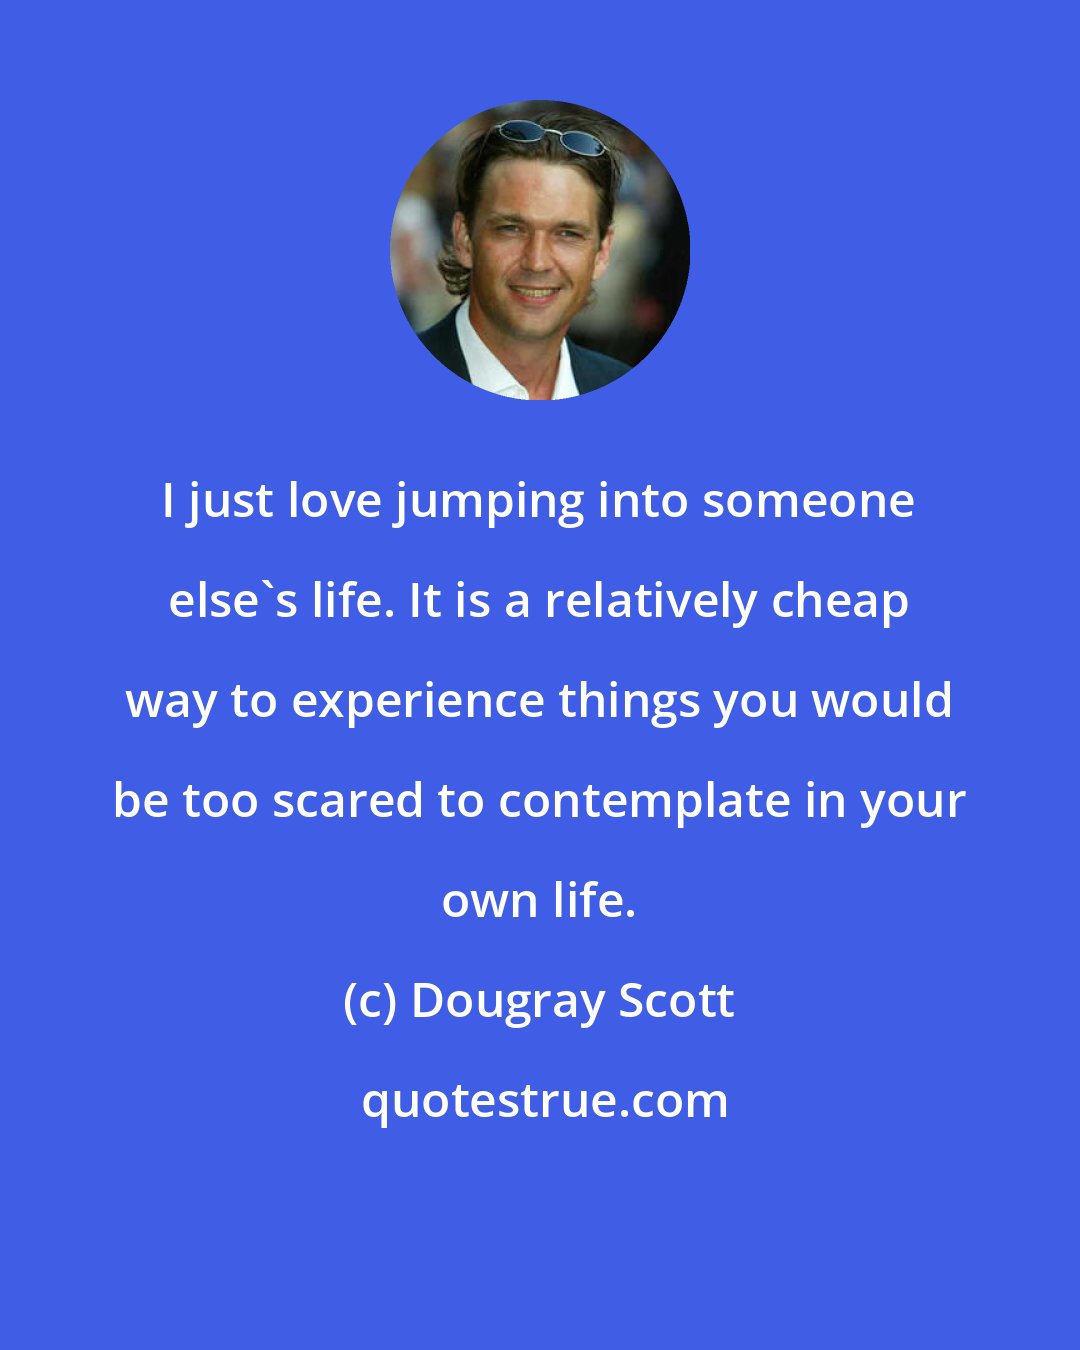 Dougray Scott: I just love jumping into someone else's life. It is a relatively cheap way to experience things you would be too scared to contemplate in your own life.